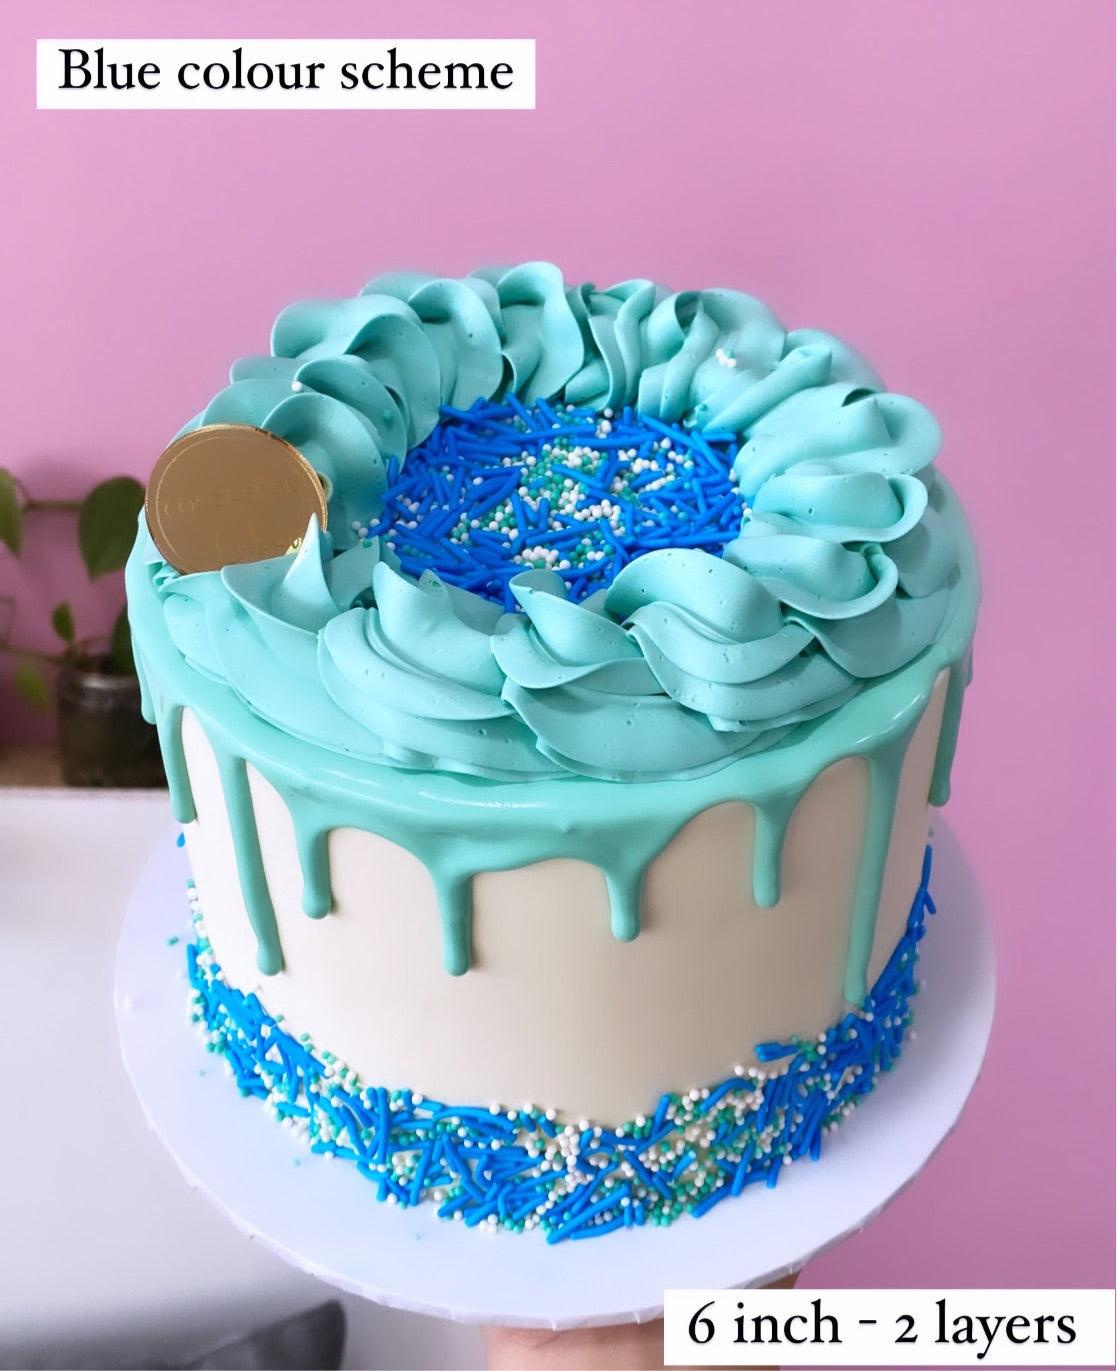 Pink & Blue Retro Cake by Cake Social in Dubai | Joi Gifts